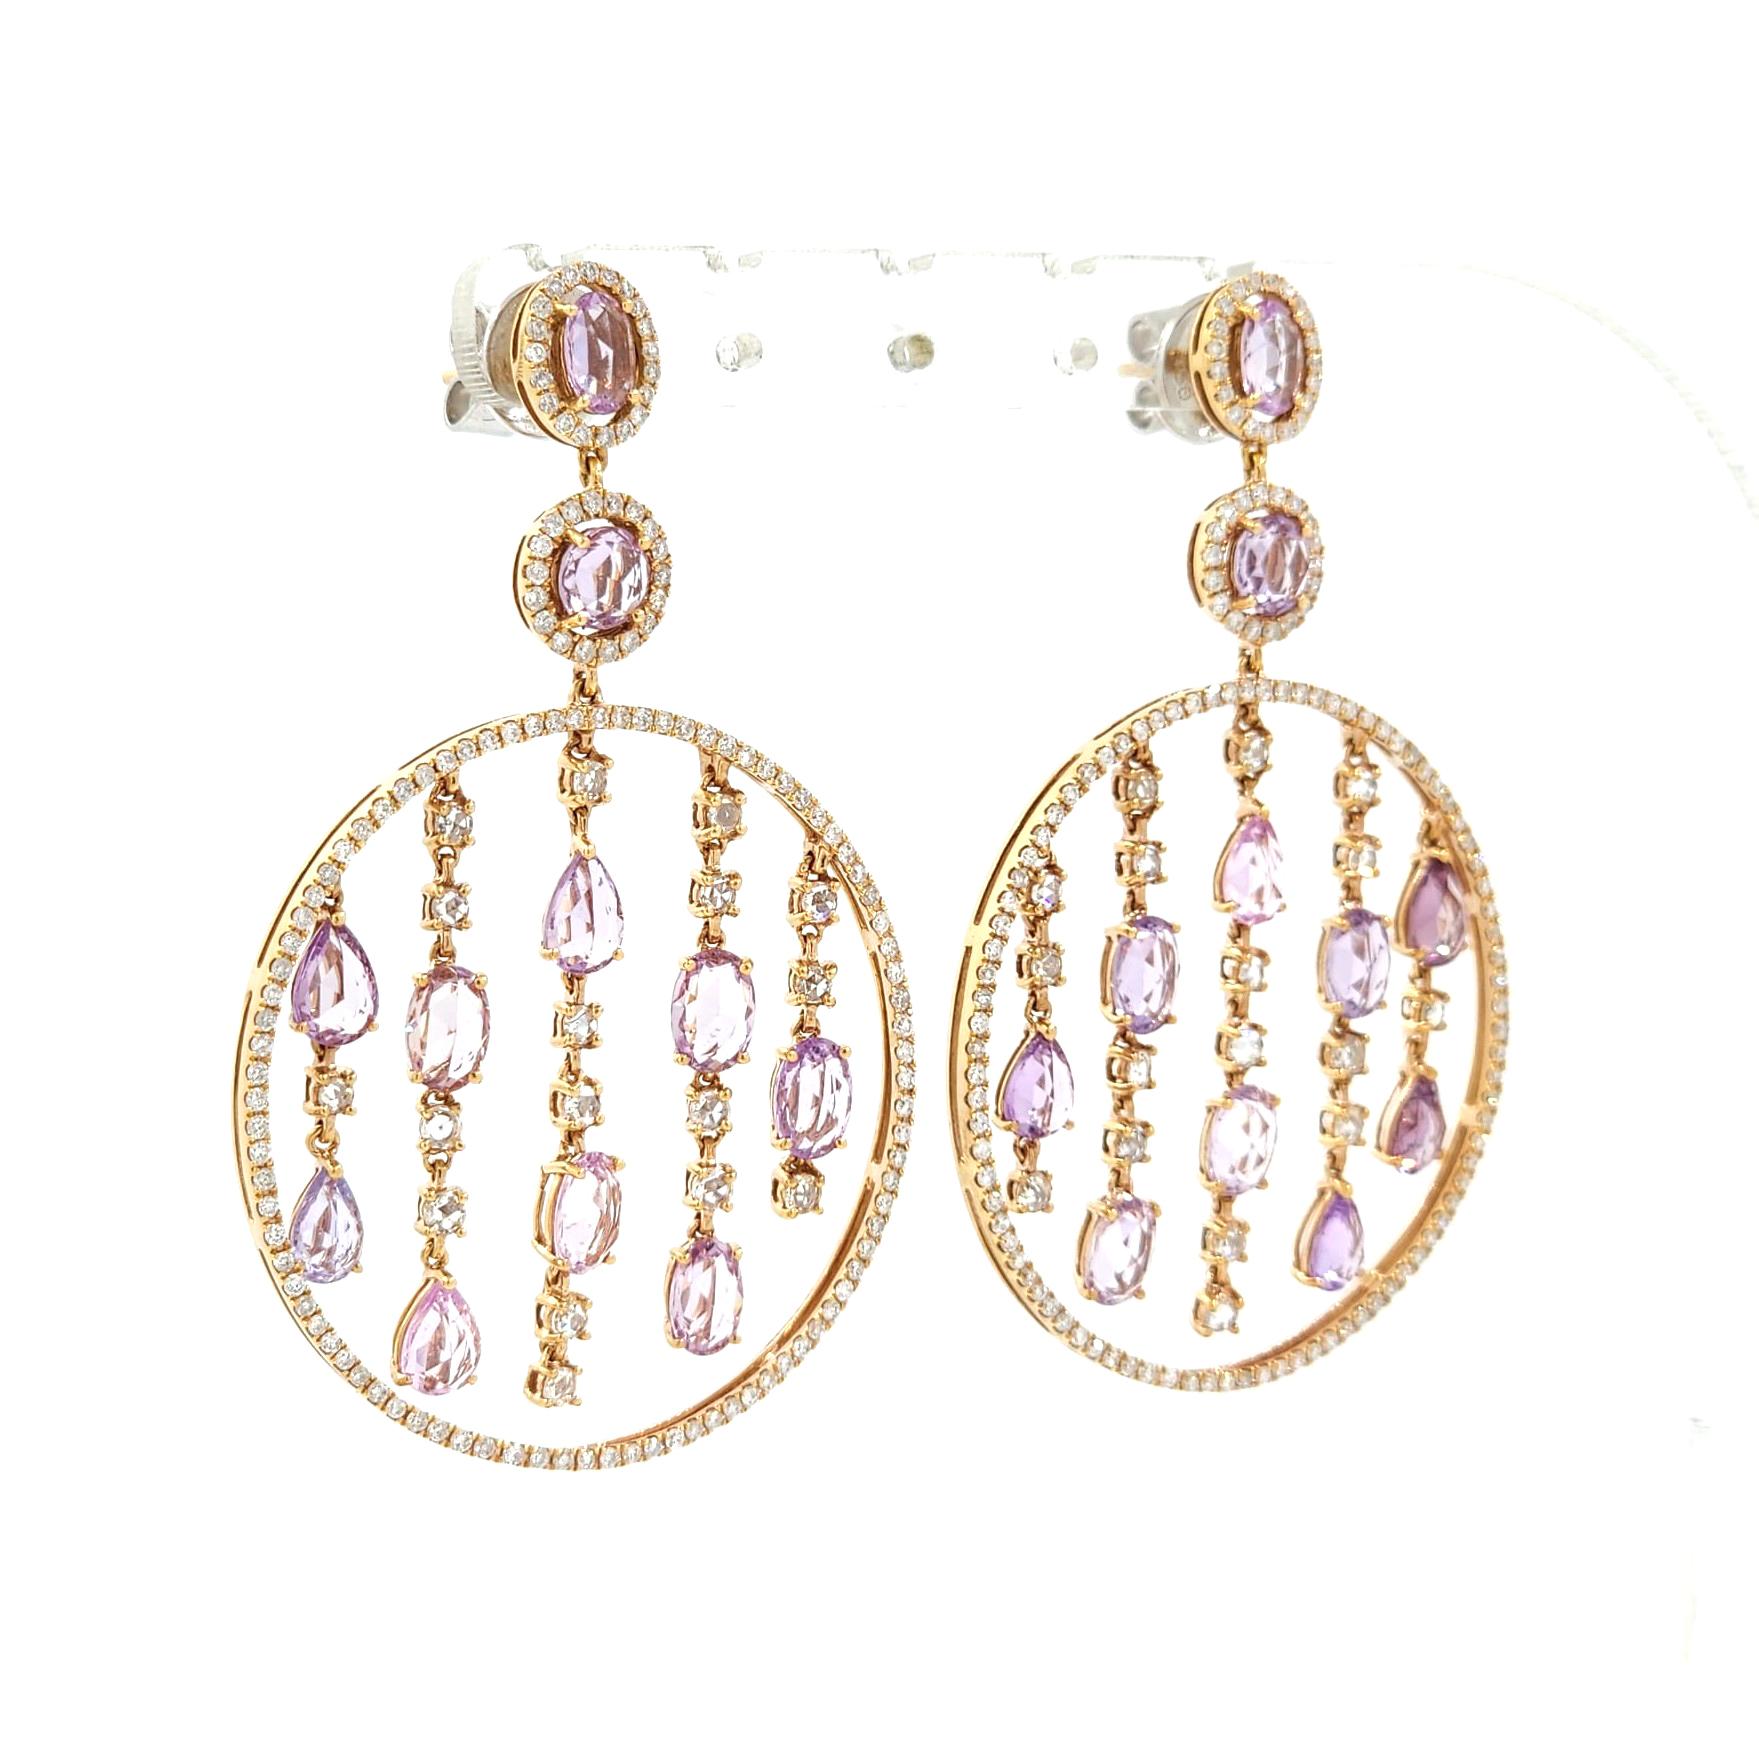 Introducing our stunning Vintage 11.75 Ct Fancy Pink Sapphire Diamond Chandelier Earrings in 18K Rose Gold. These earrings are a true testament to the allure and elegance of natural gemstones, designed to make a bold and luxurious